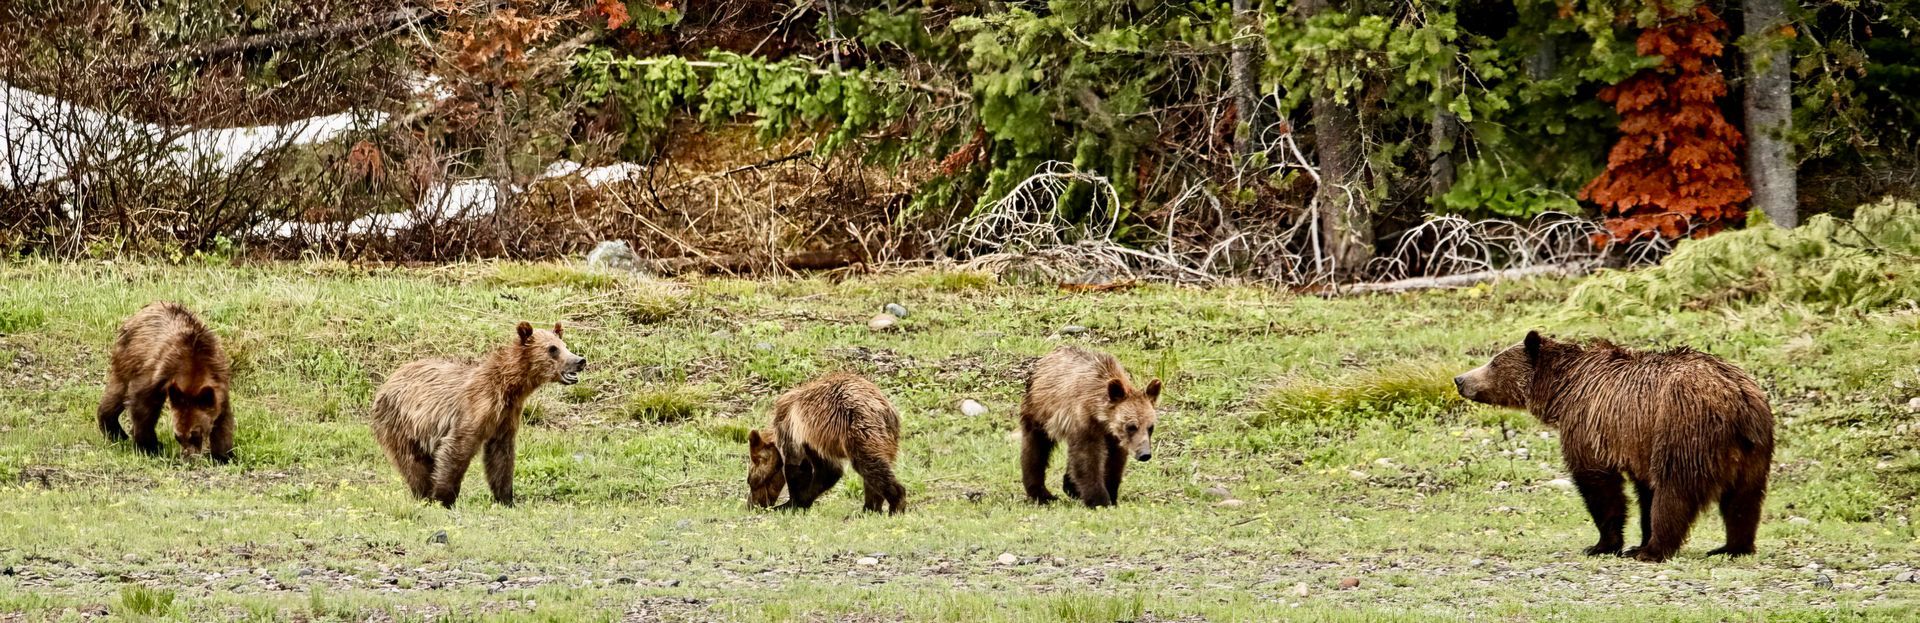 RMNPhotographer Rocky Mountain National Park Guided Tours Blog Post 399 Grizzly Bear and Cubs